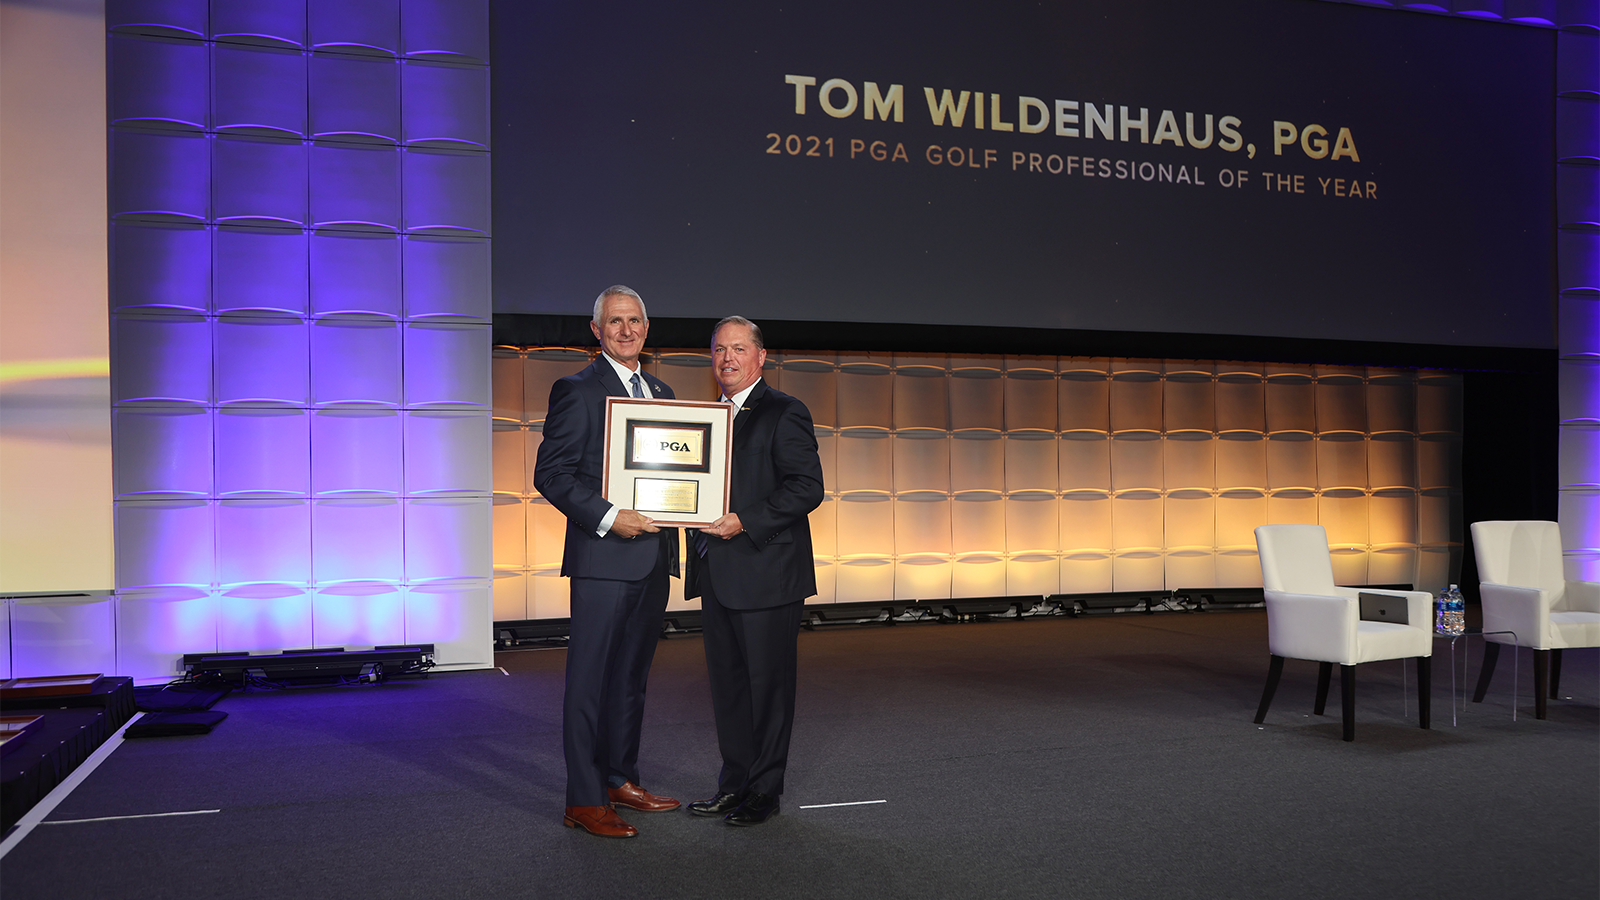 PGA of America President Jim Richerson poses for a photo with the winner of the PGA Professional of the Year Award Tom Wildenhaus during the PGA Special Awards night for the 106th PGA Annual Meeting at JW Marriott Phoenix Desert Ridge Resort & Spa on Tuesday, November 1, 2022 in Phoenix, Arizona. (Photo by Sam Greenwood/PGA of America)